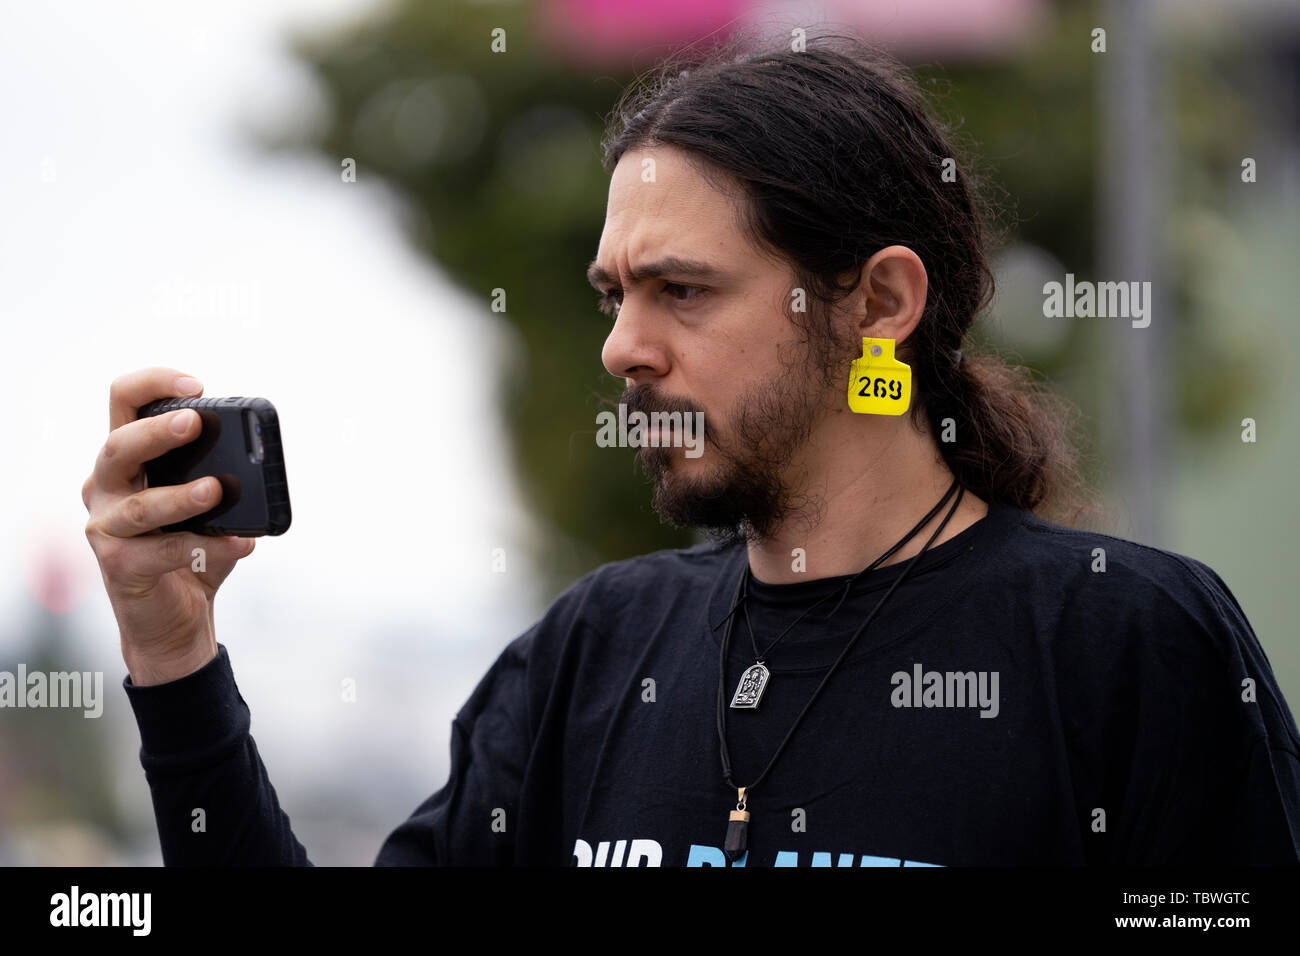 An animal rights activist wears a cattle ID ear tag during the 9th Annual National Animal Rights Day in Los Angeles, California.  The event included a memorial ceremony and a funeral march for animals that are slaughtered for meat consumption, die in research laboratories and the cosmetics industry. Organizers called to end animal cruelty and suffering. Stock Photo